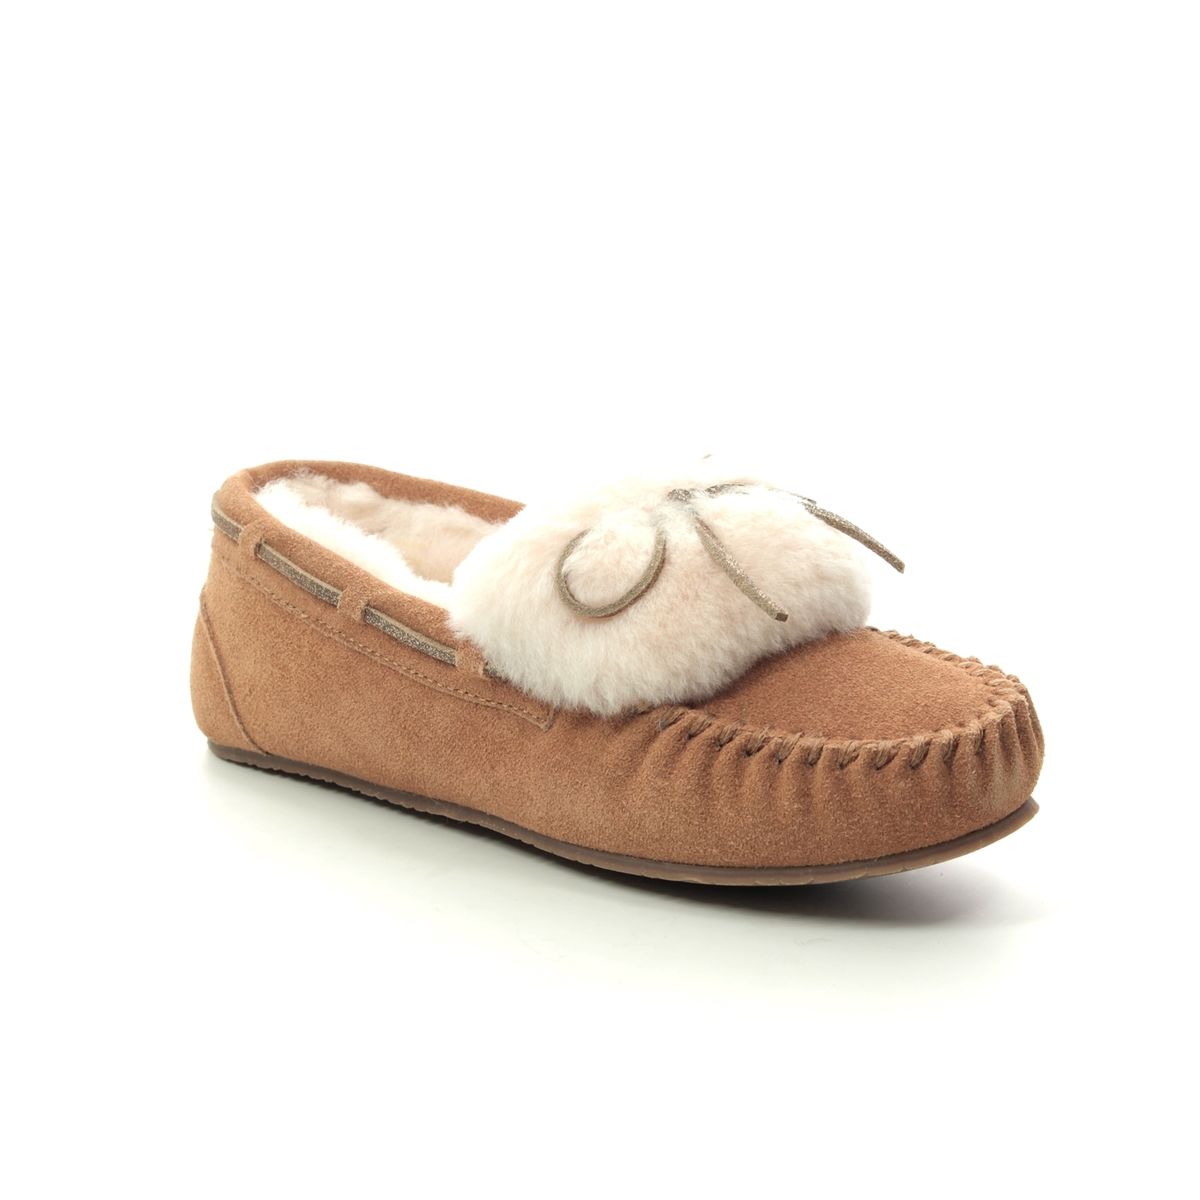 Clarks Warm Glamour D Fit Tan suede 